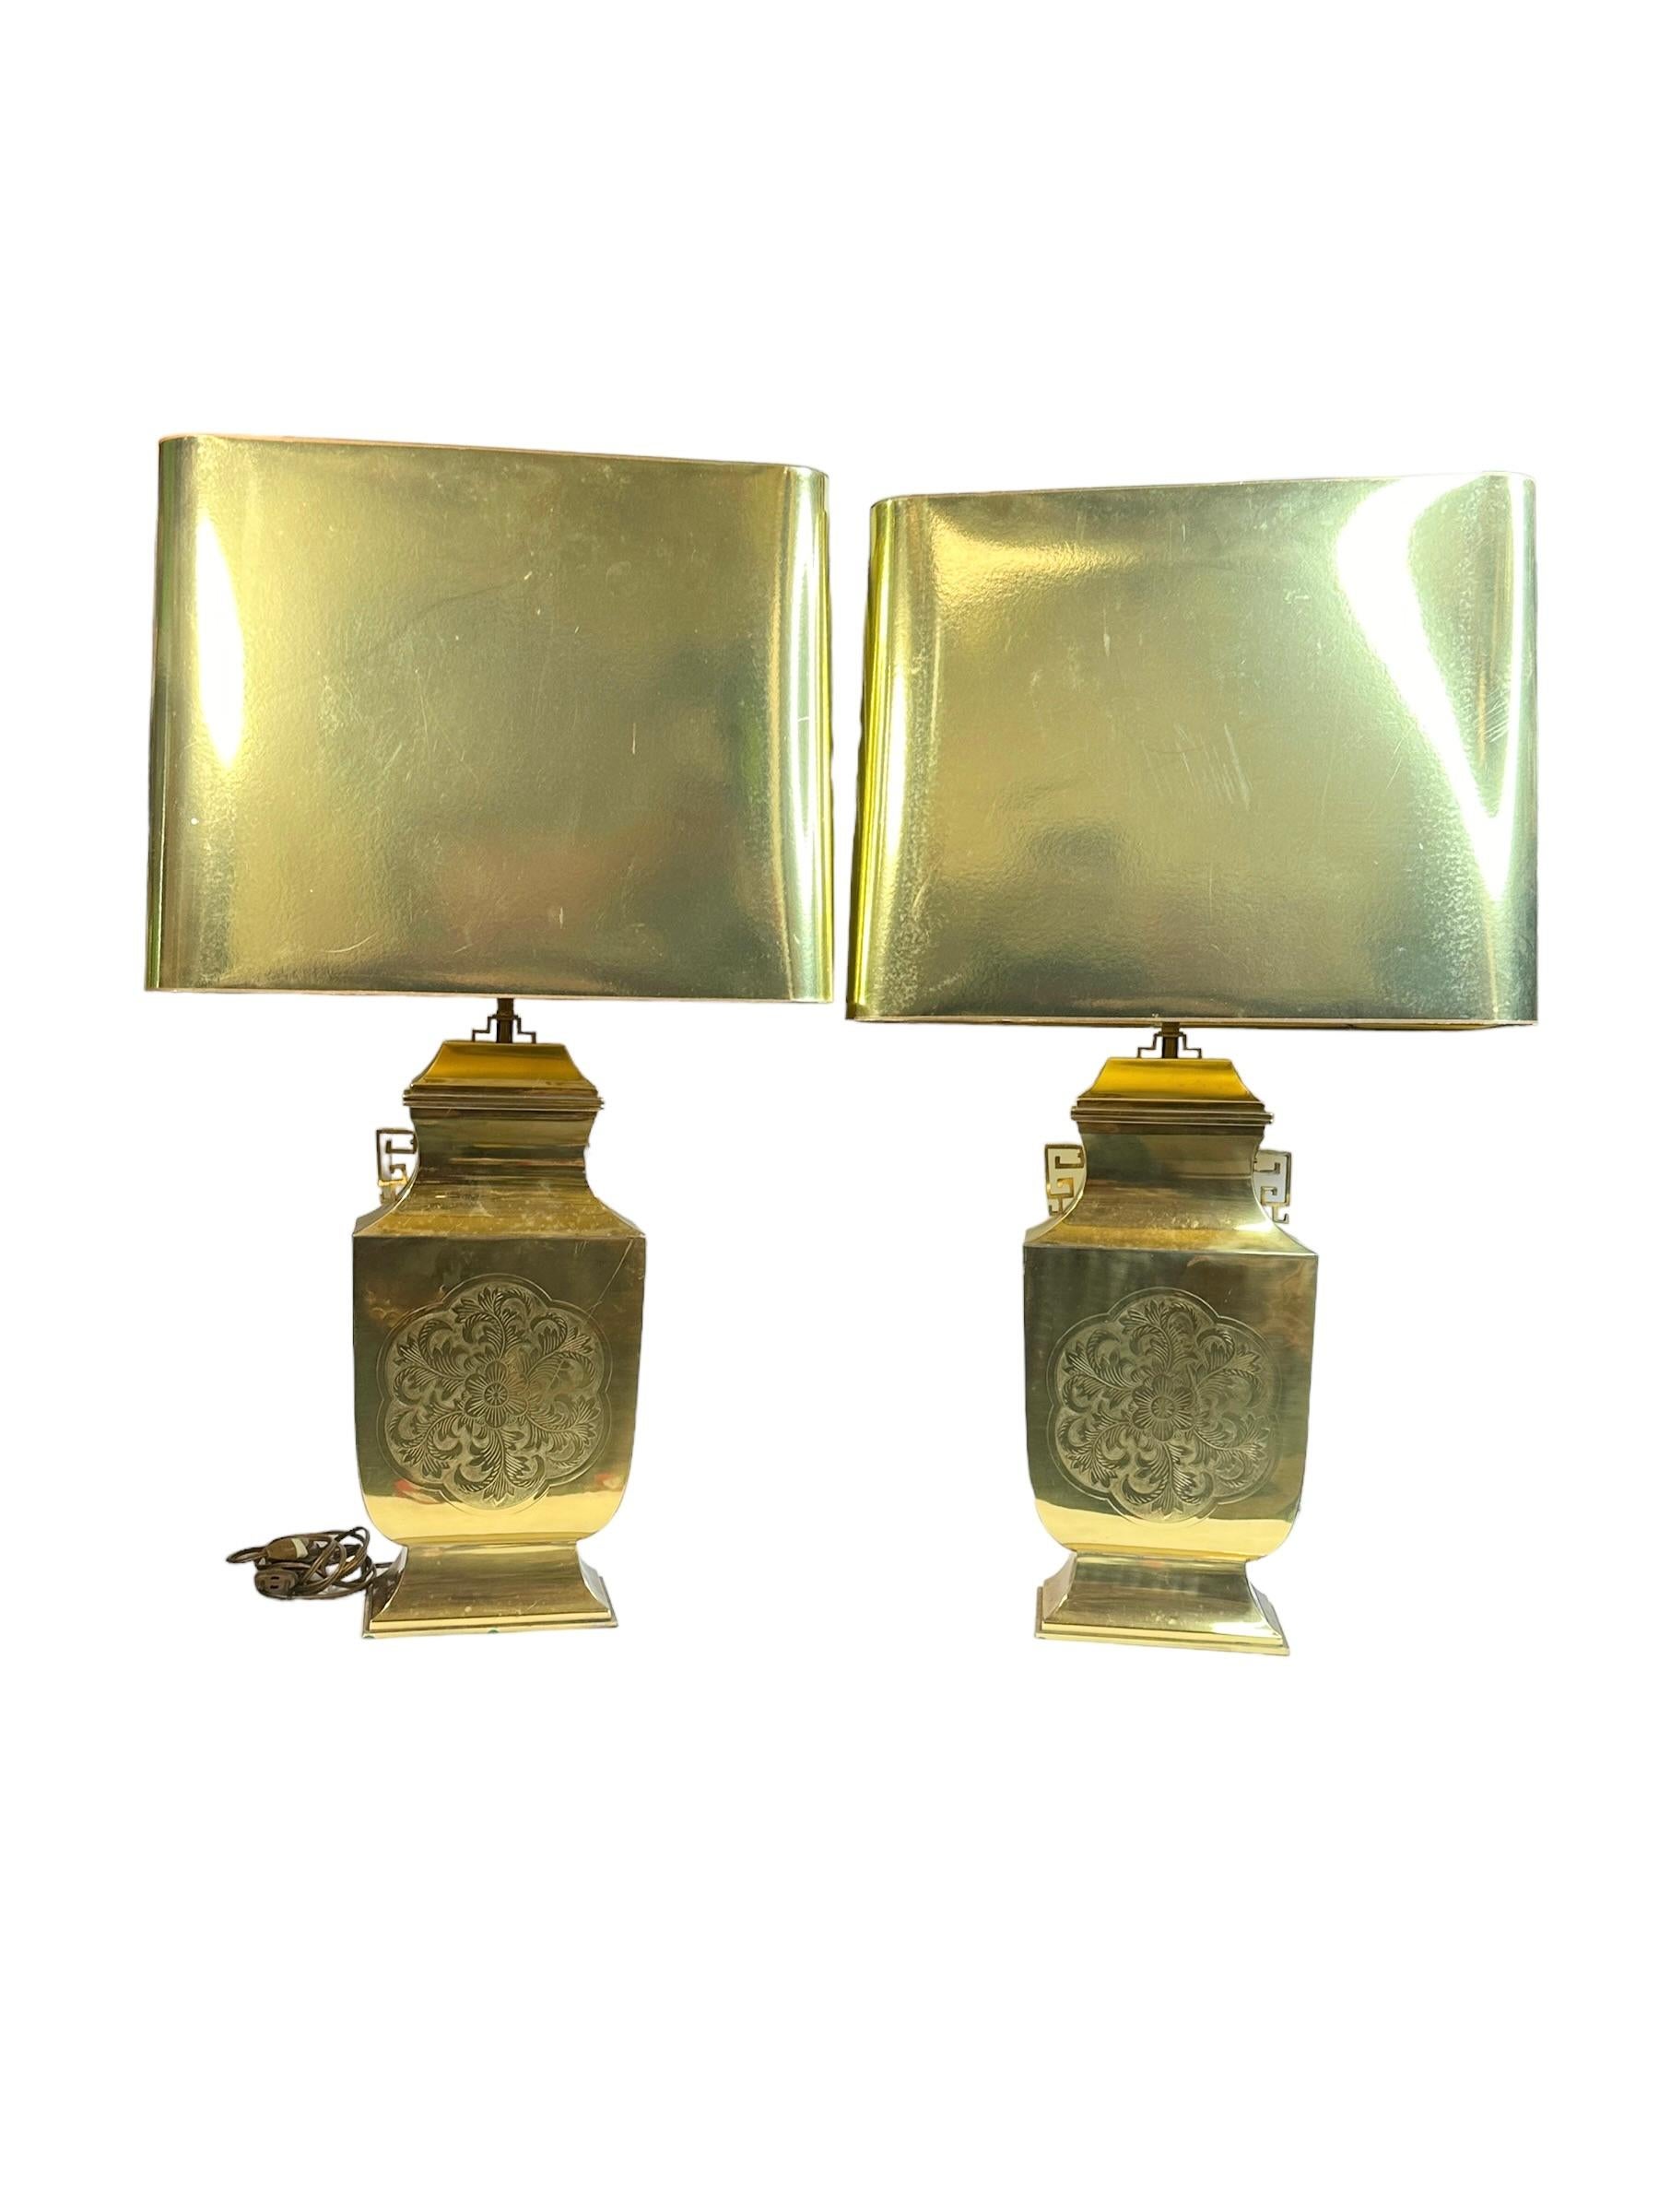 Hollywood Regency Monumental Pair of Table Lamps Gold Brass Pagoda Style with Shade Vintage, Italy For Sale